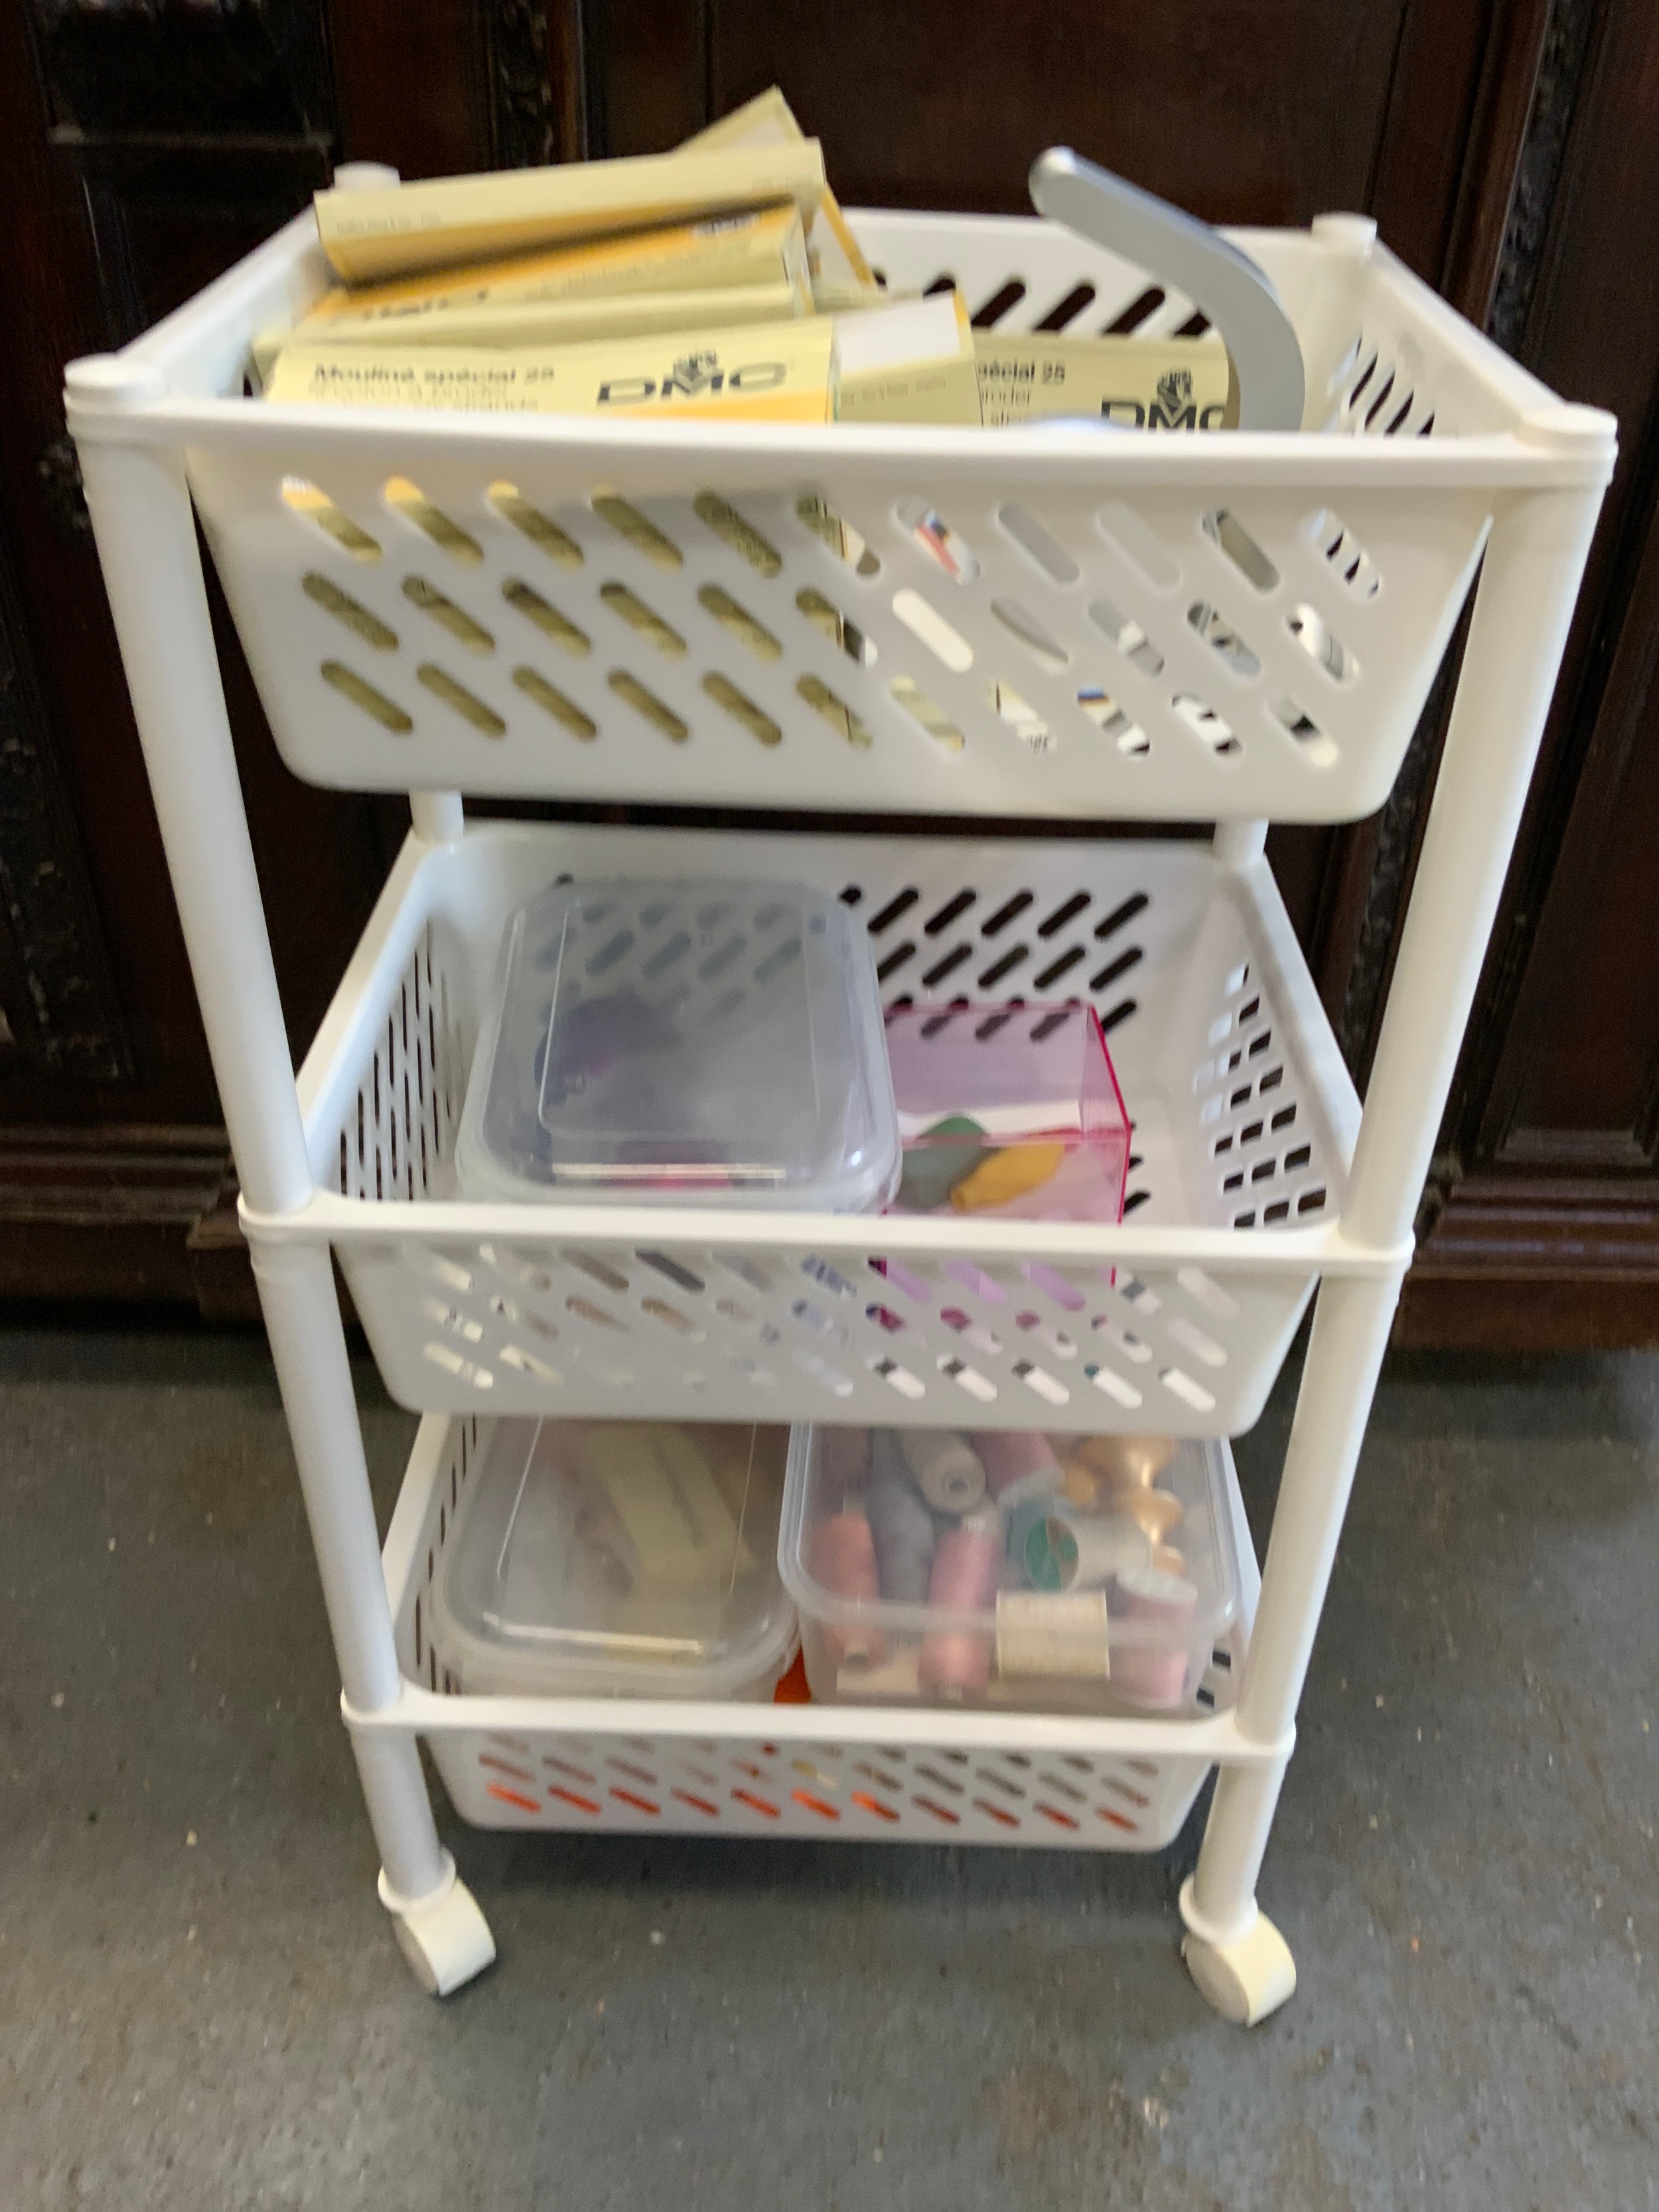 Storage Rack and Contents - Sewing Accessories